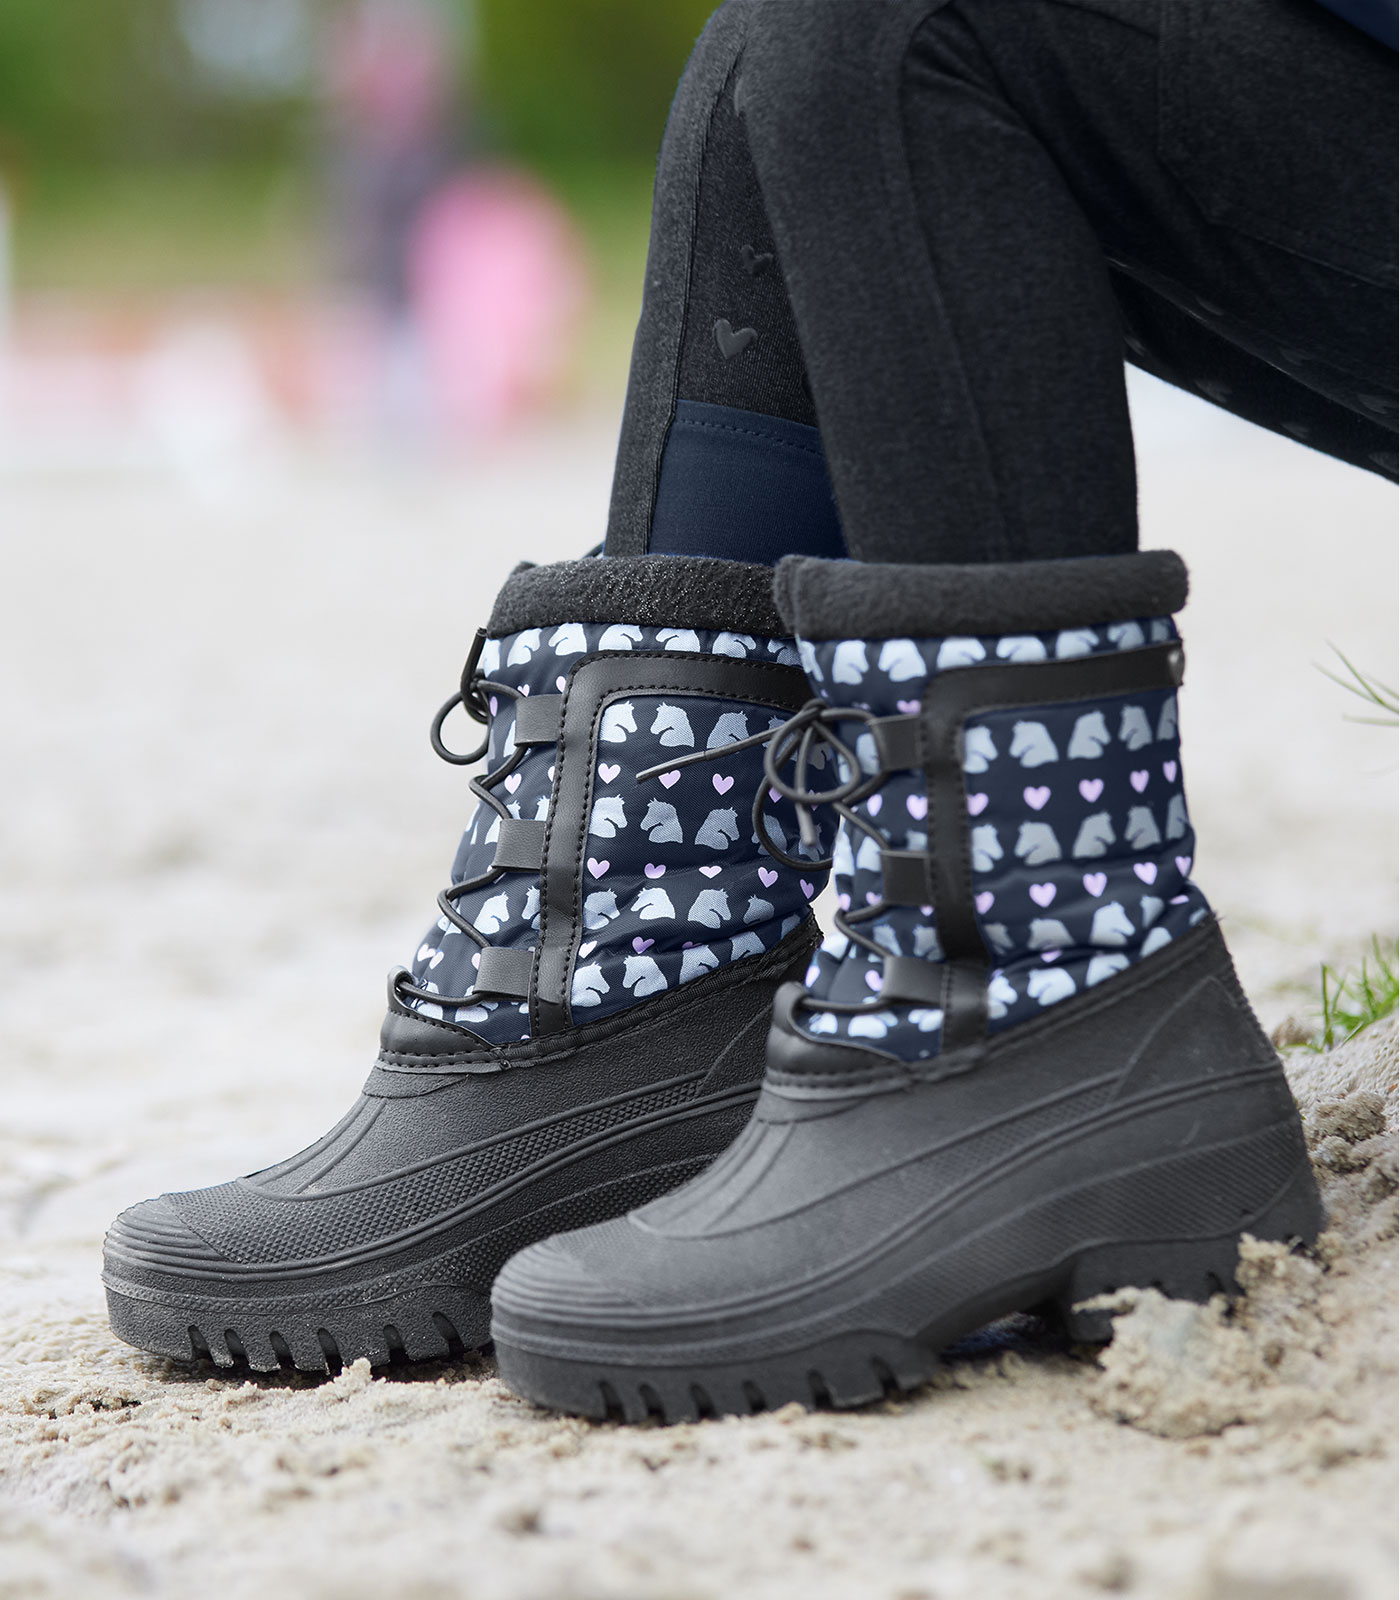 Chaussures thermiques Lucky Snowfall, pour enfants